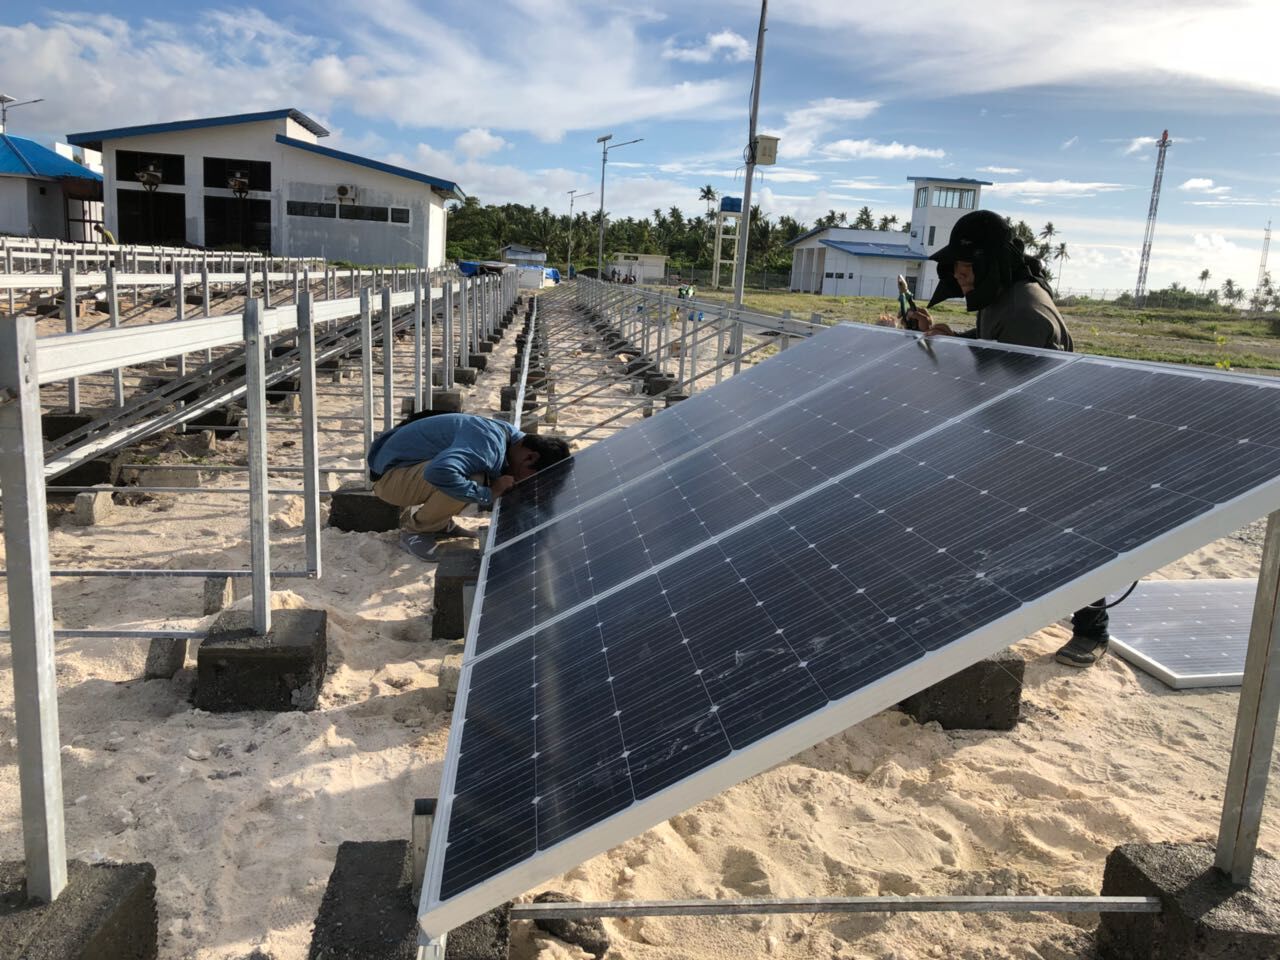 How we finish the airport projects 60KW solar energy panels in Indonesia？